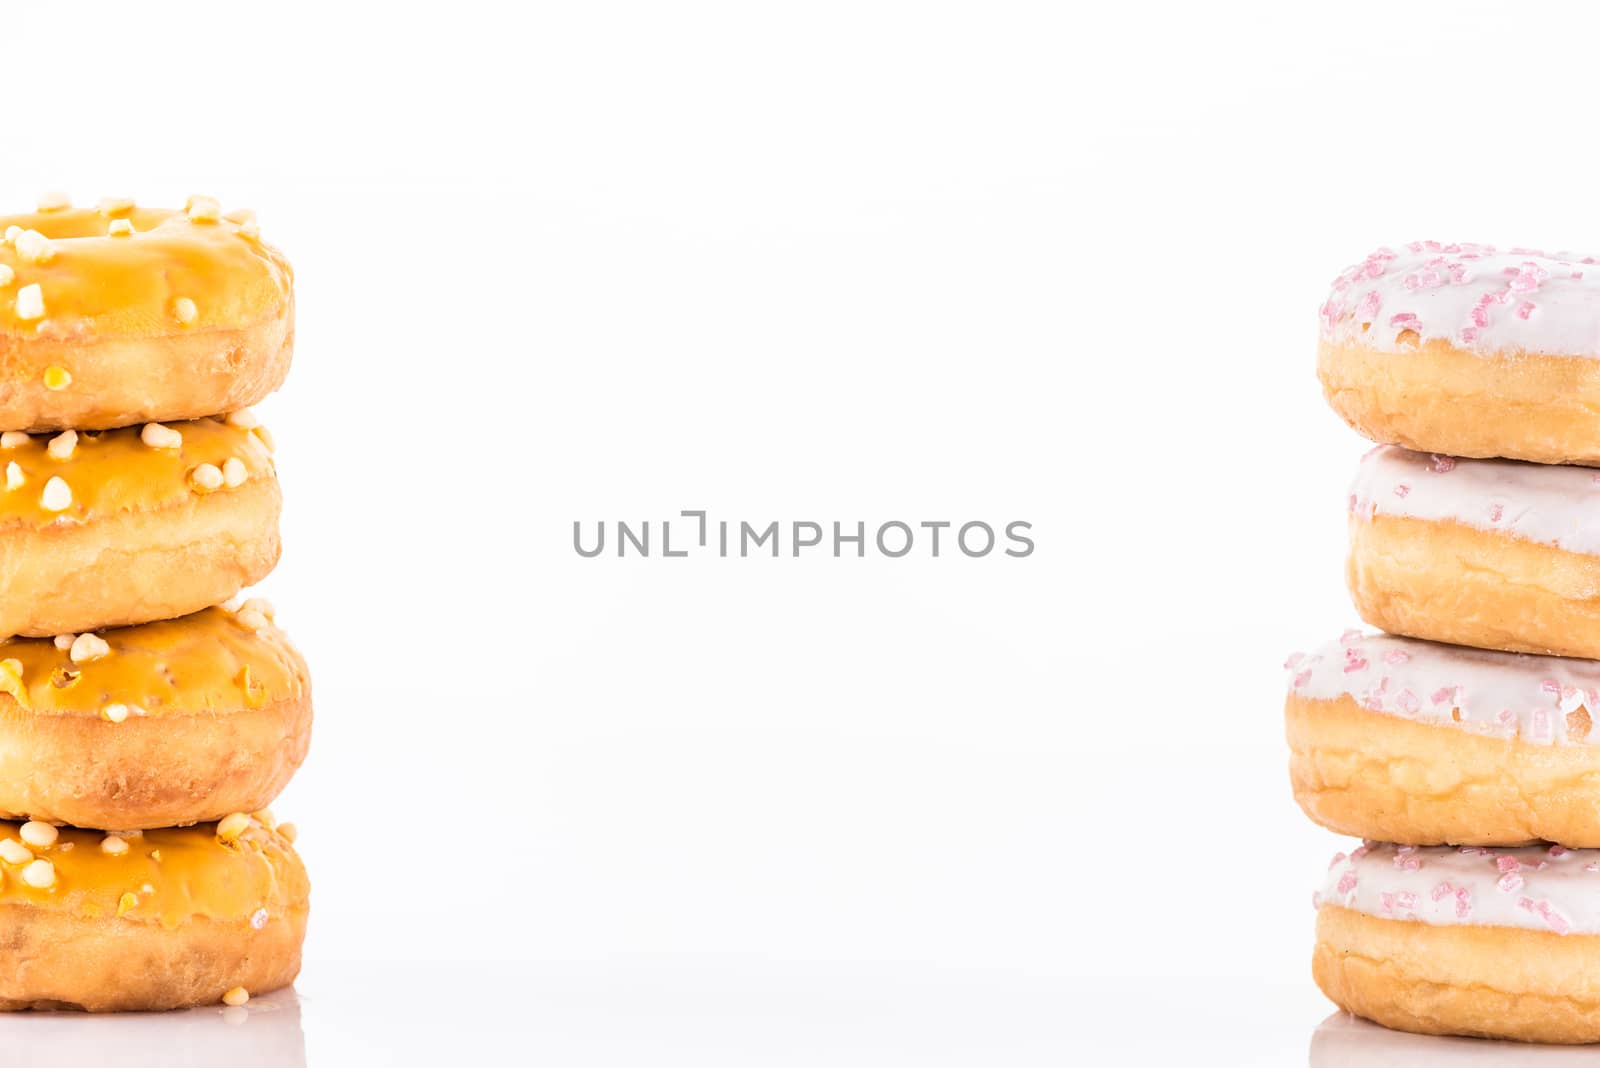 Donuts Tower Stack Pile on White Background. Food Border Backgro by merc67